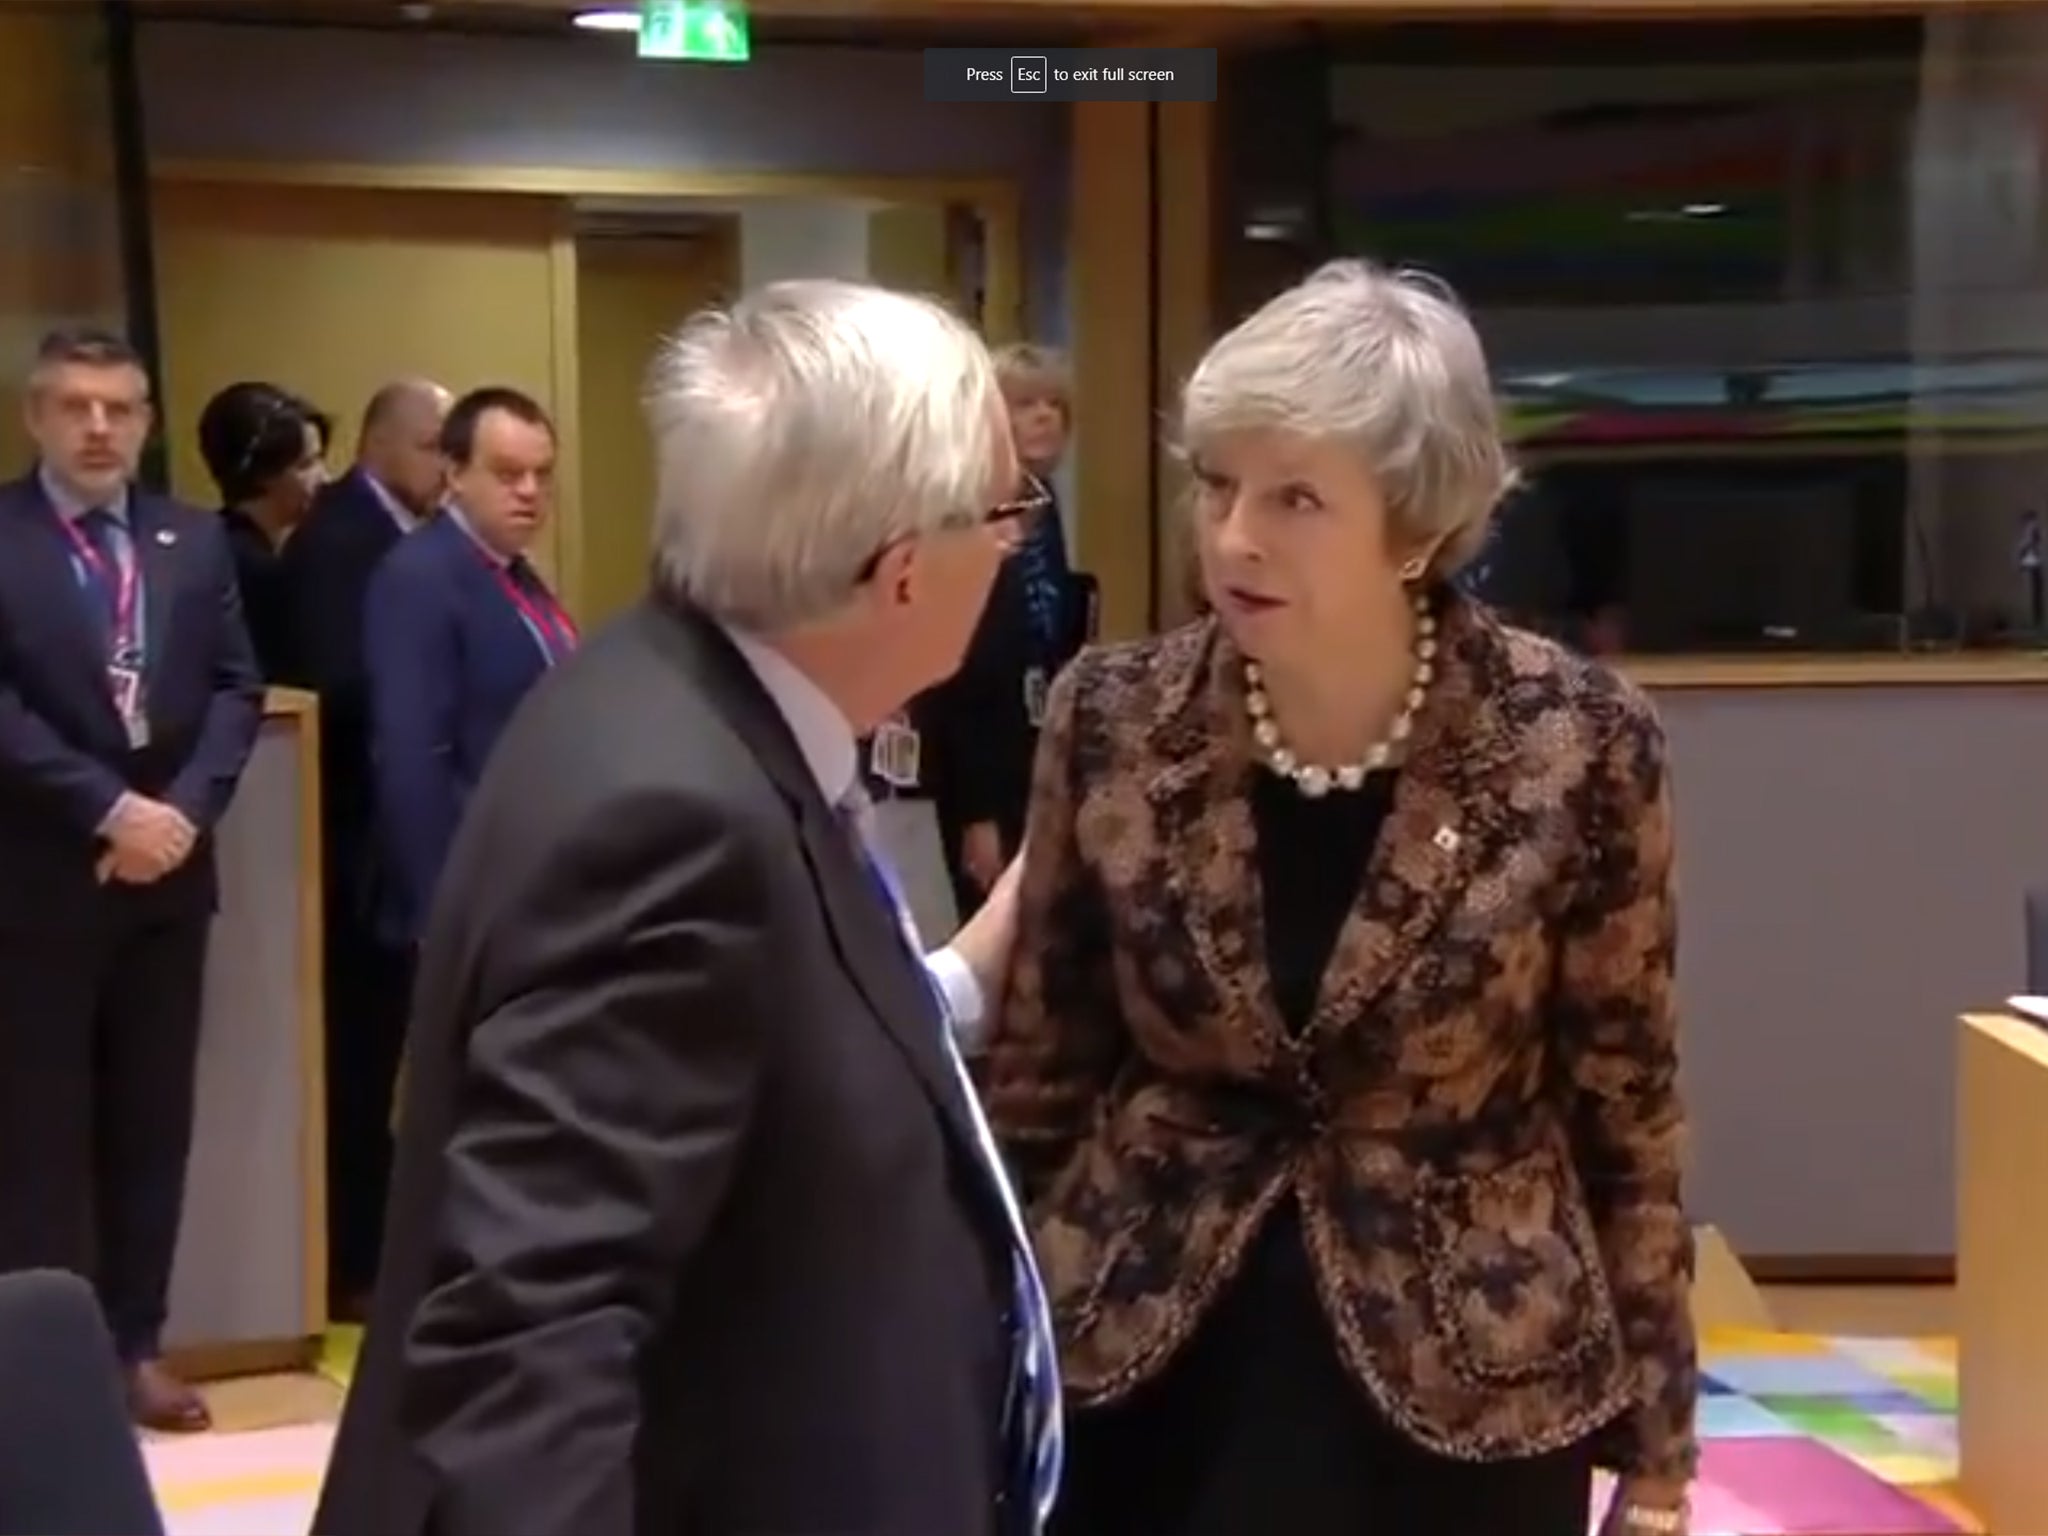 Theresa May and Jean-Claude Juncker had an icy conversation on Friday morning